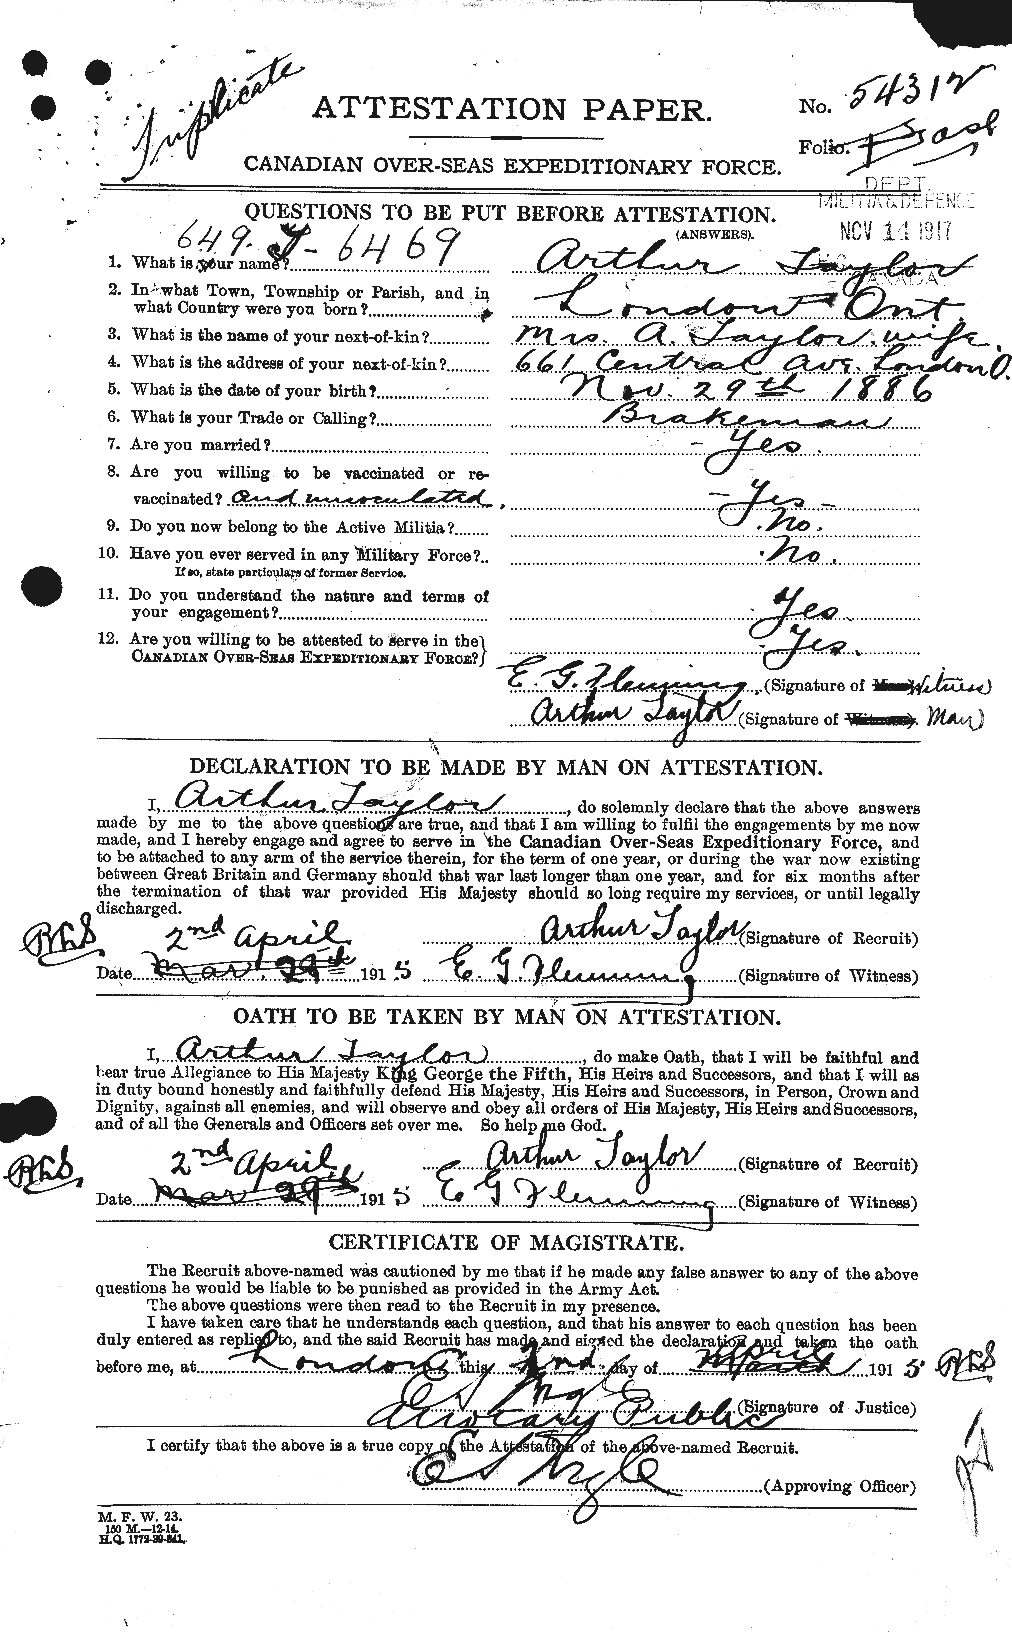 Personnel Records of the First World War - CEF 626709a